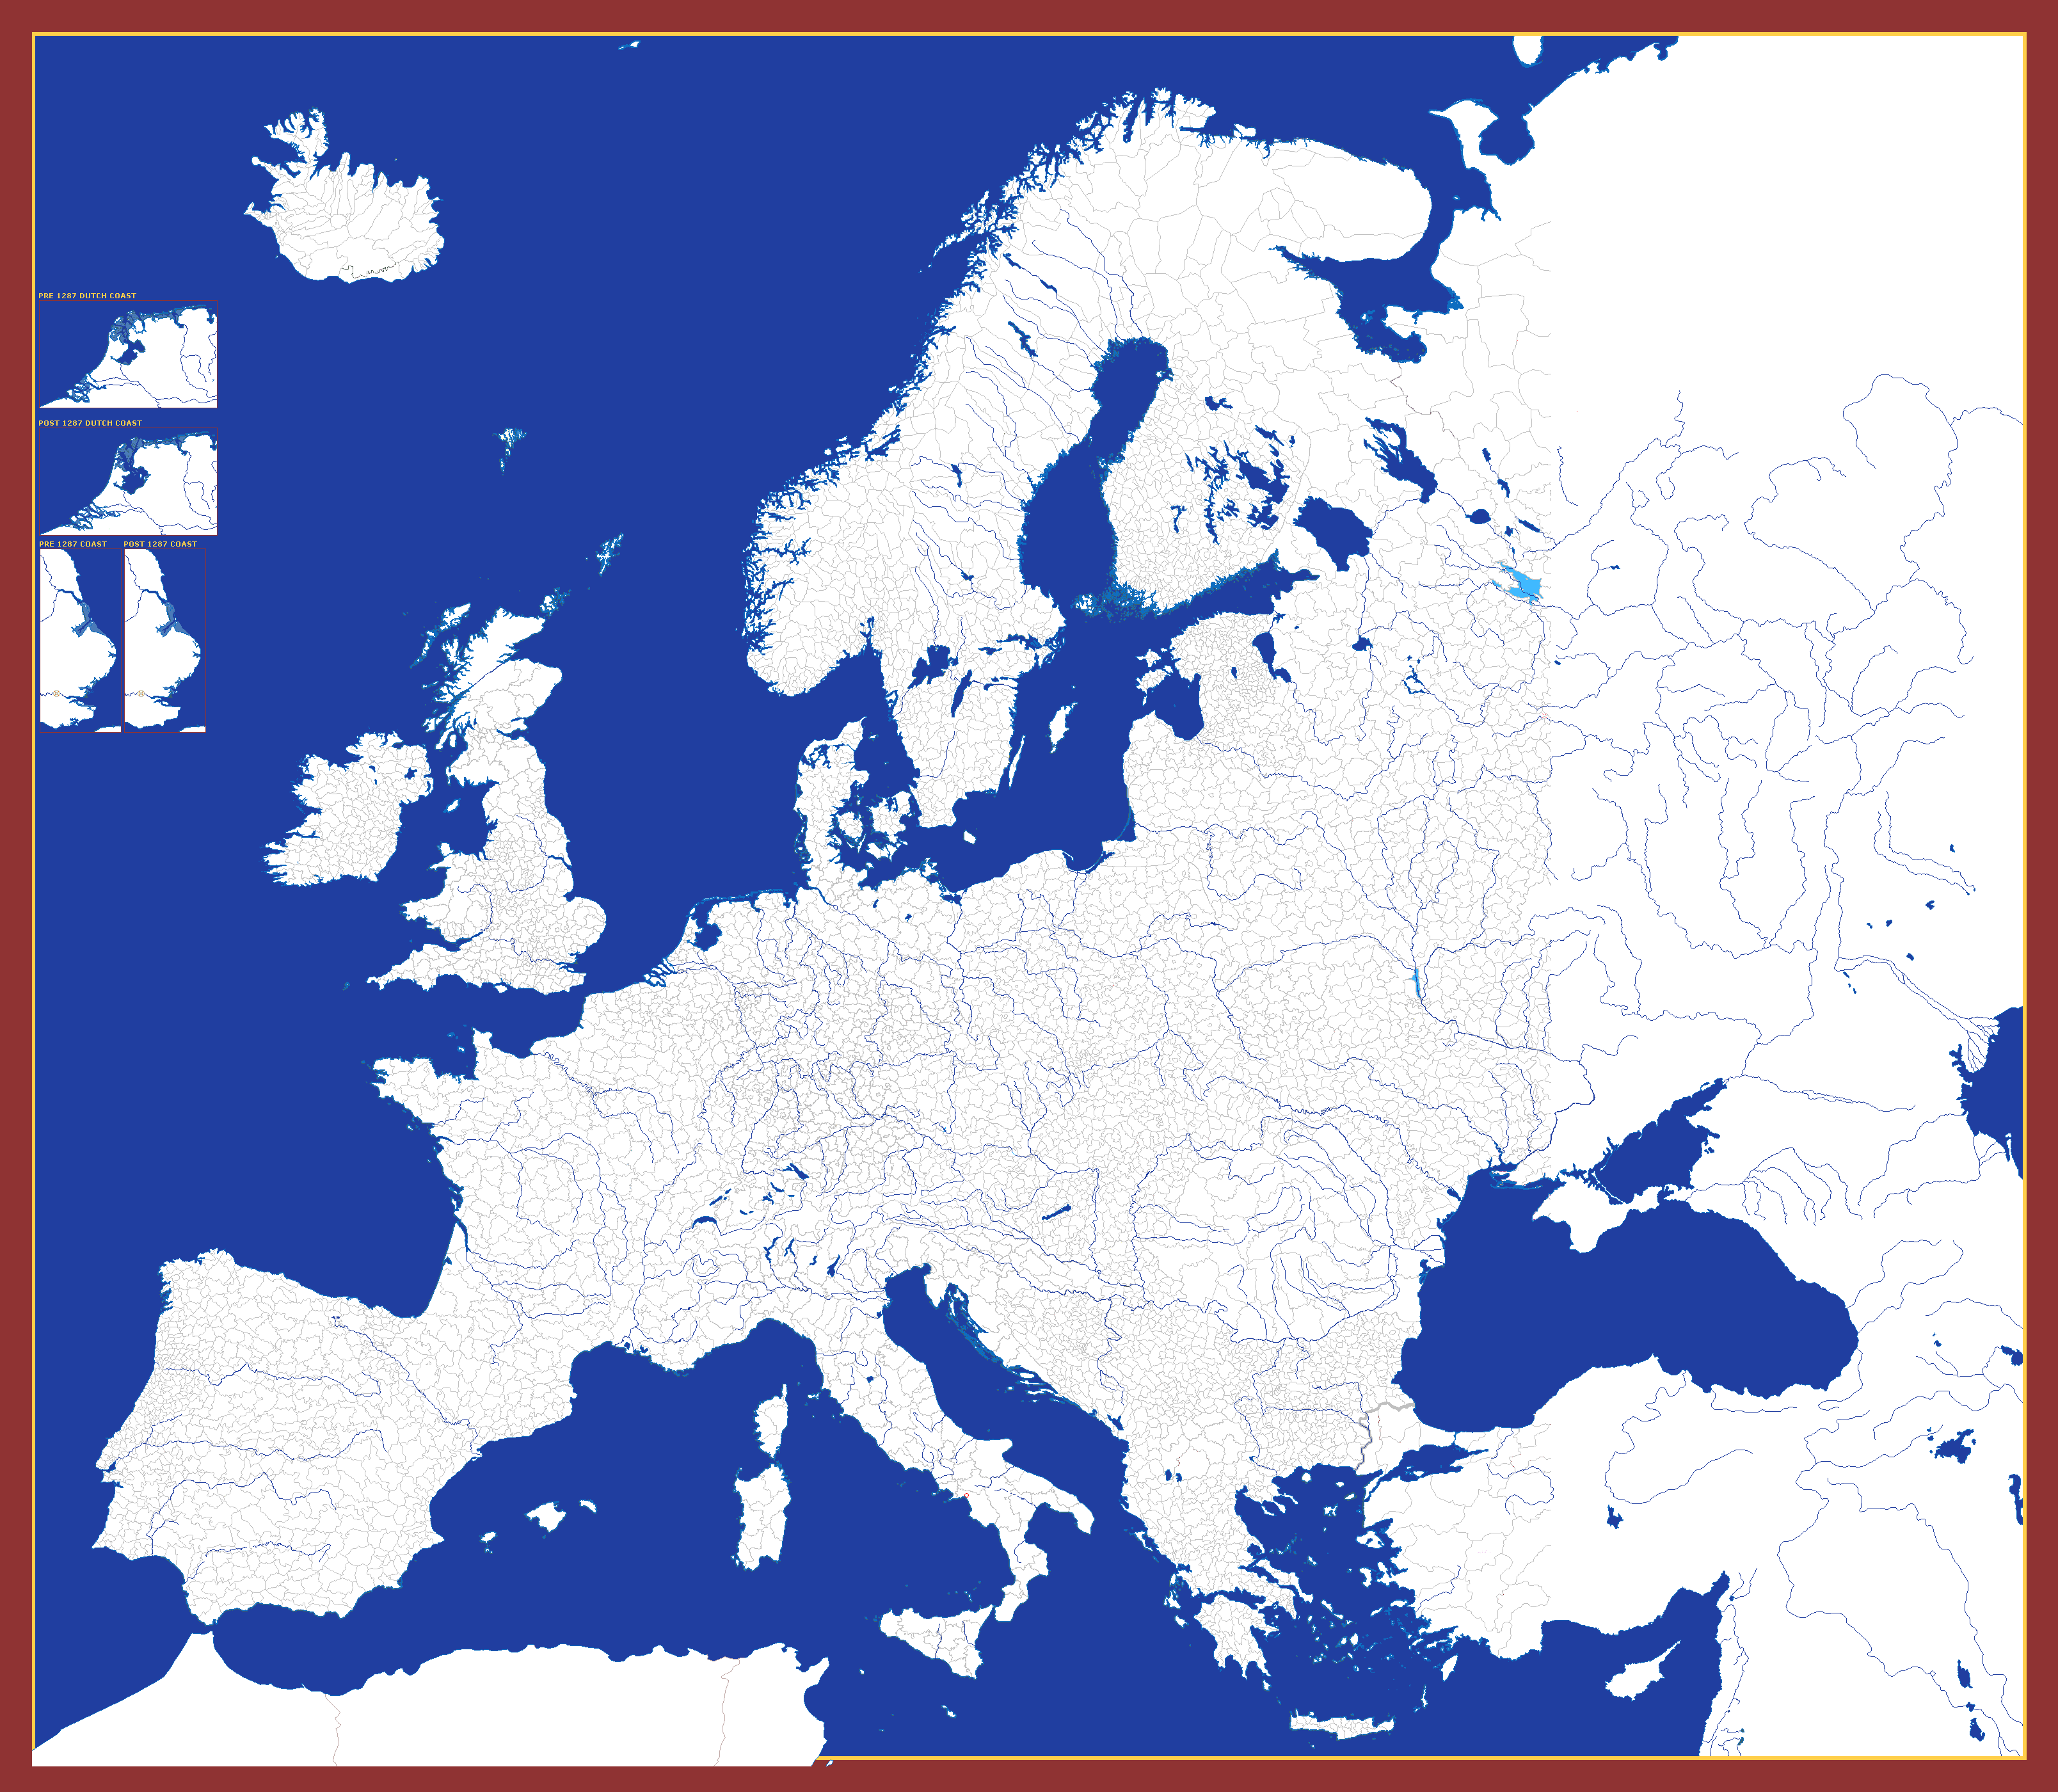 Master Blank Europe incl coast alts.png